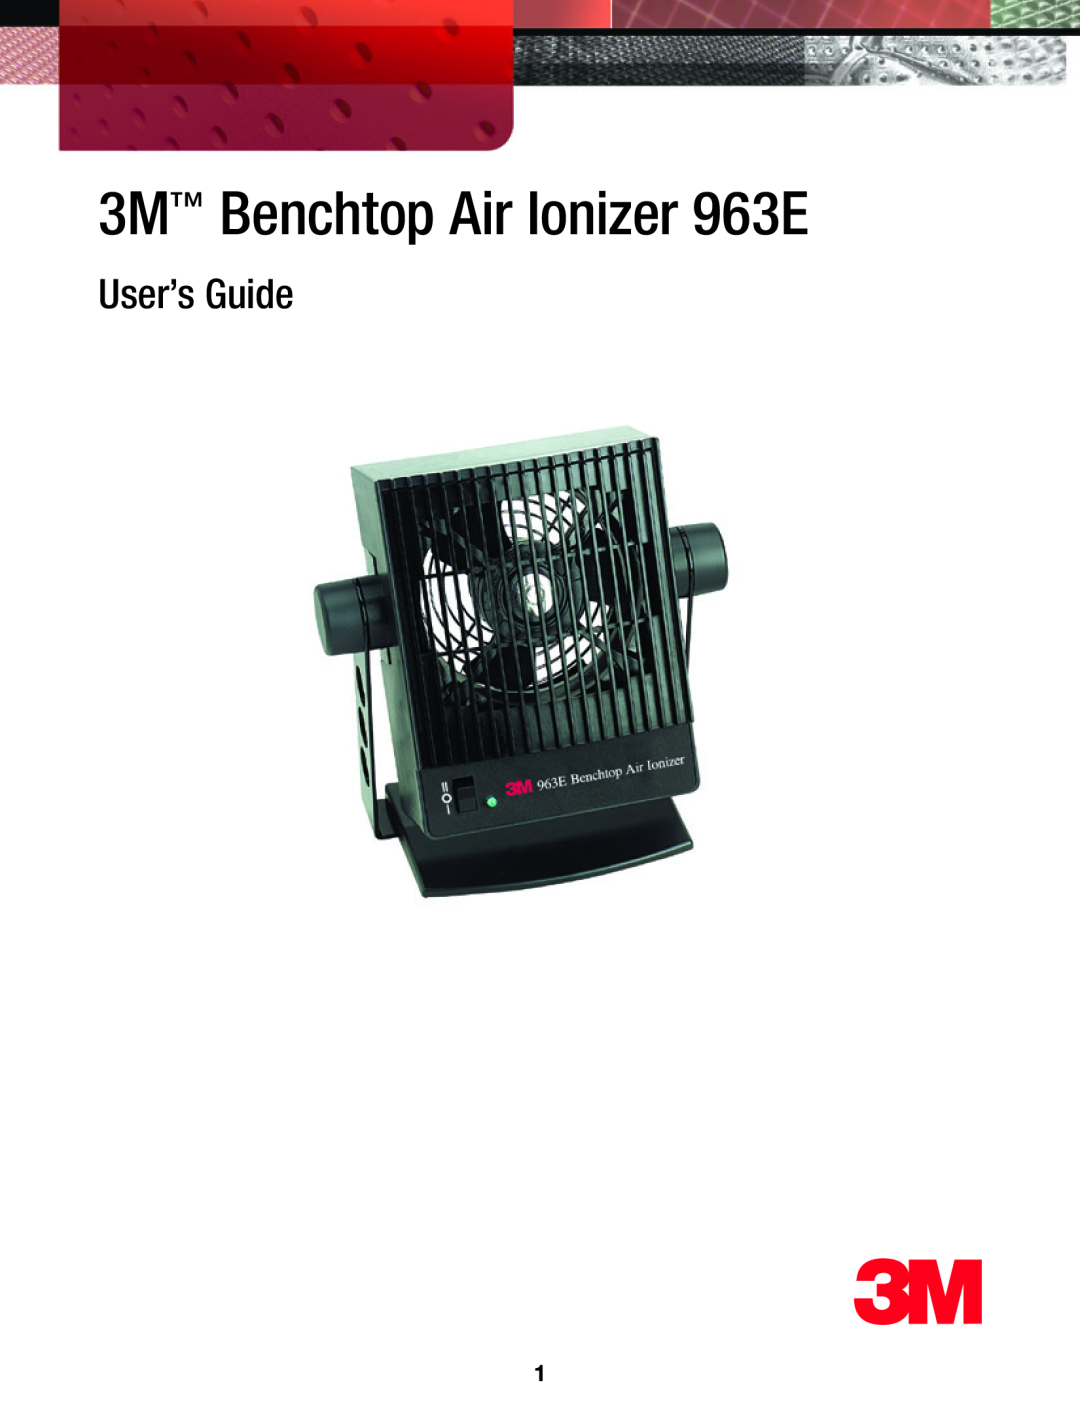 3M manual 3M Benchtop Air Ionizer 963E, User’s Guide 